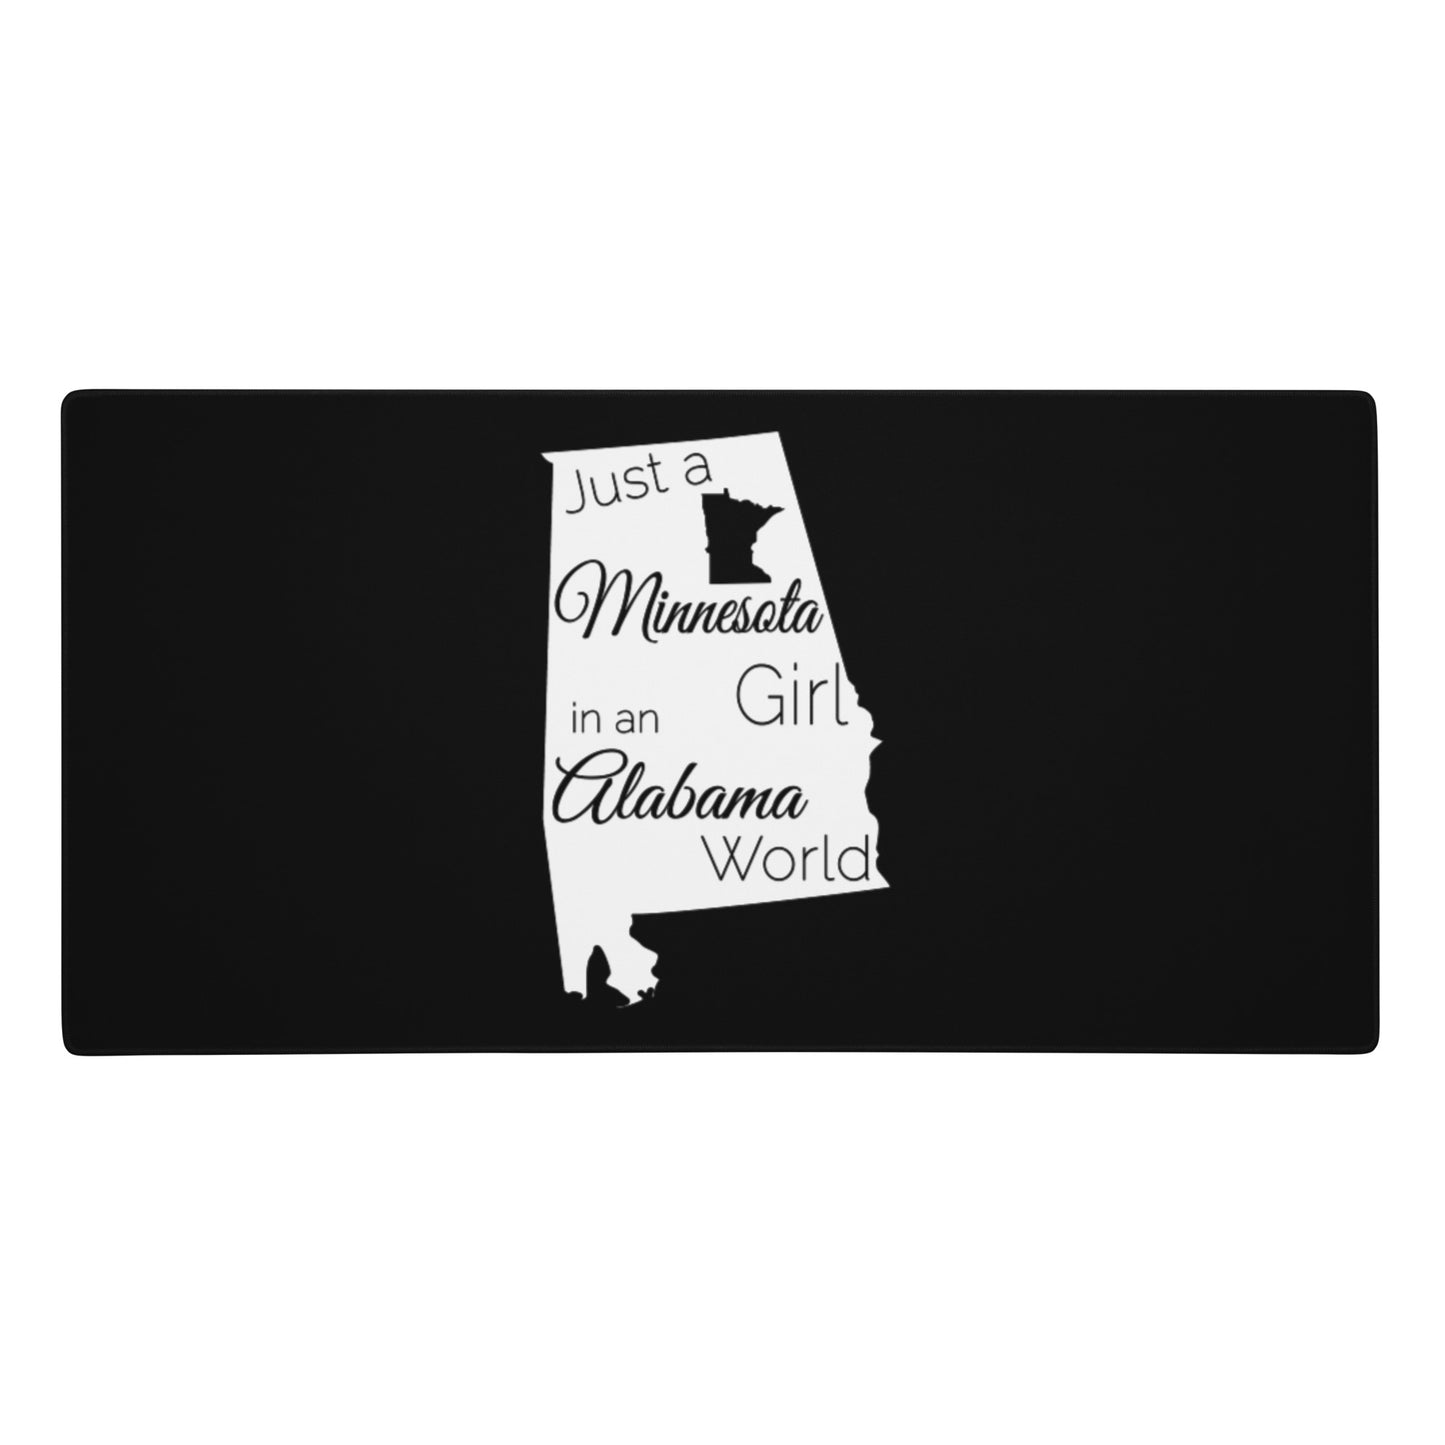 Just a Minnesota Girl in an Alabama World Gaming mouse pad